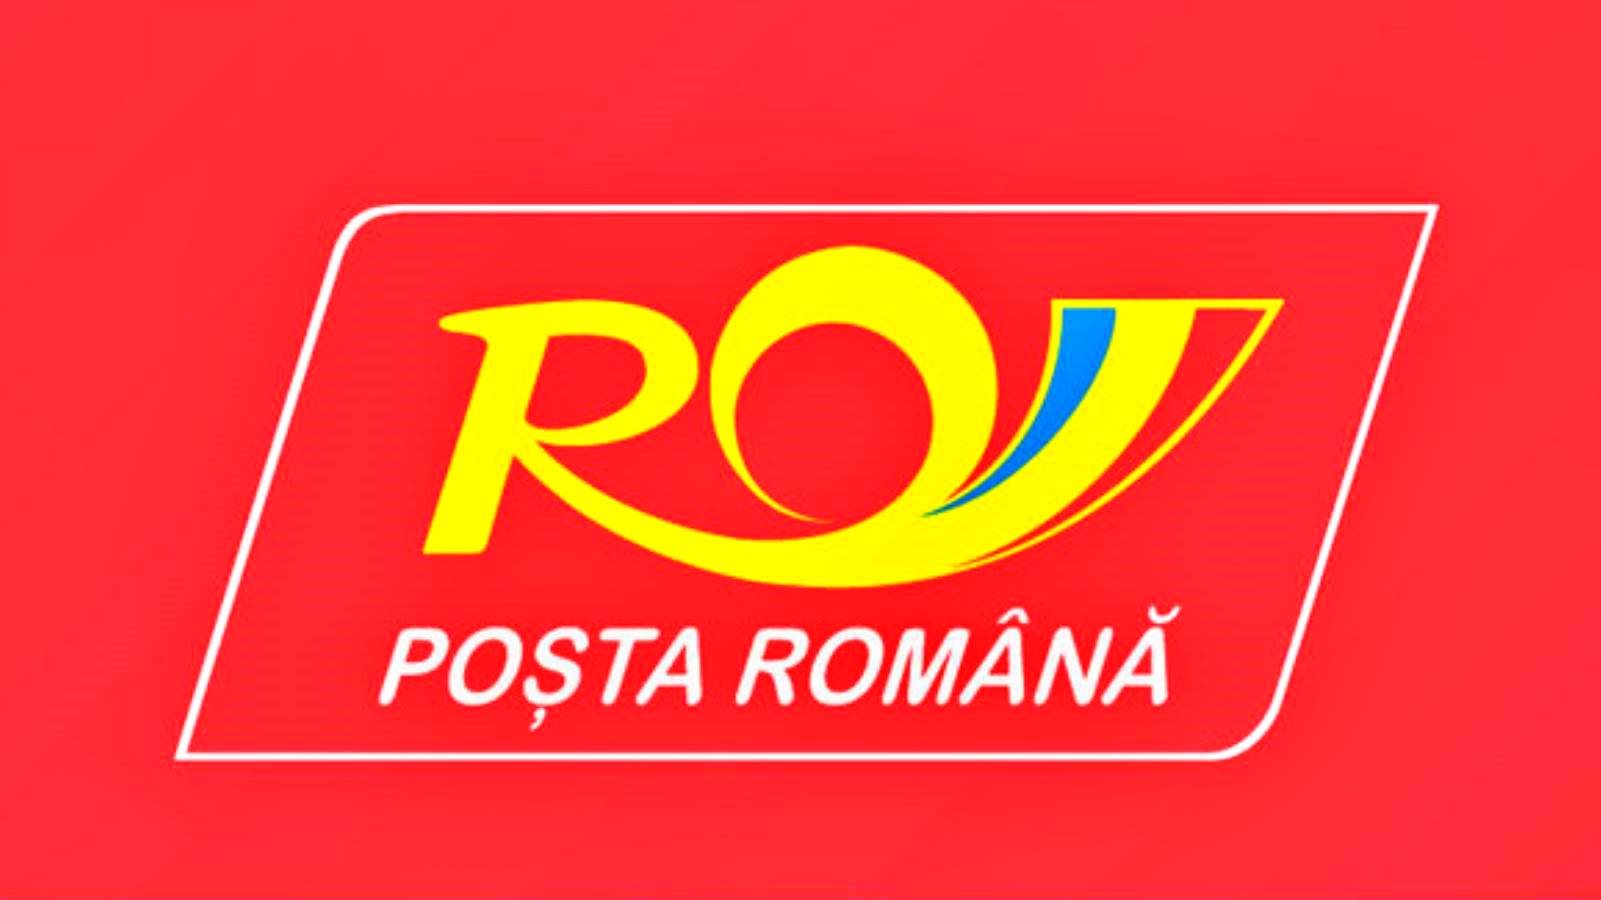 The Official Announcement from the Romanian Post that Surprised Many Romanians